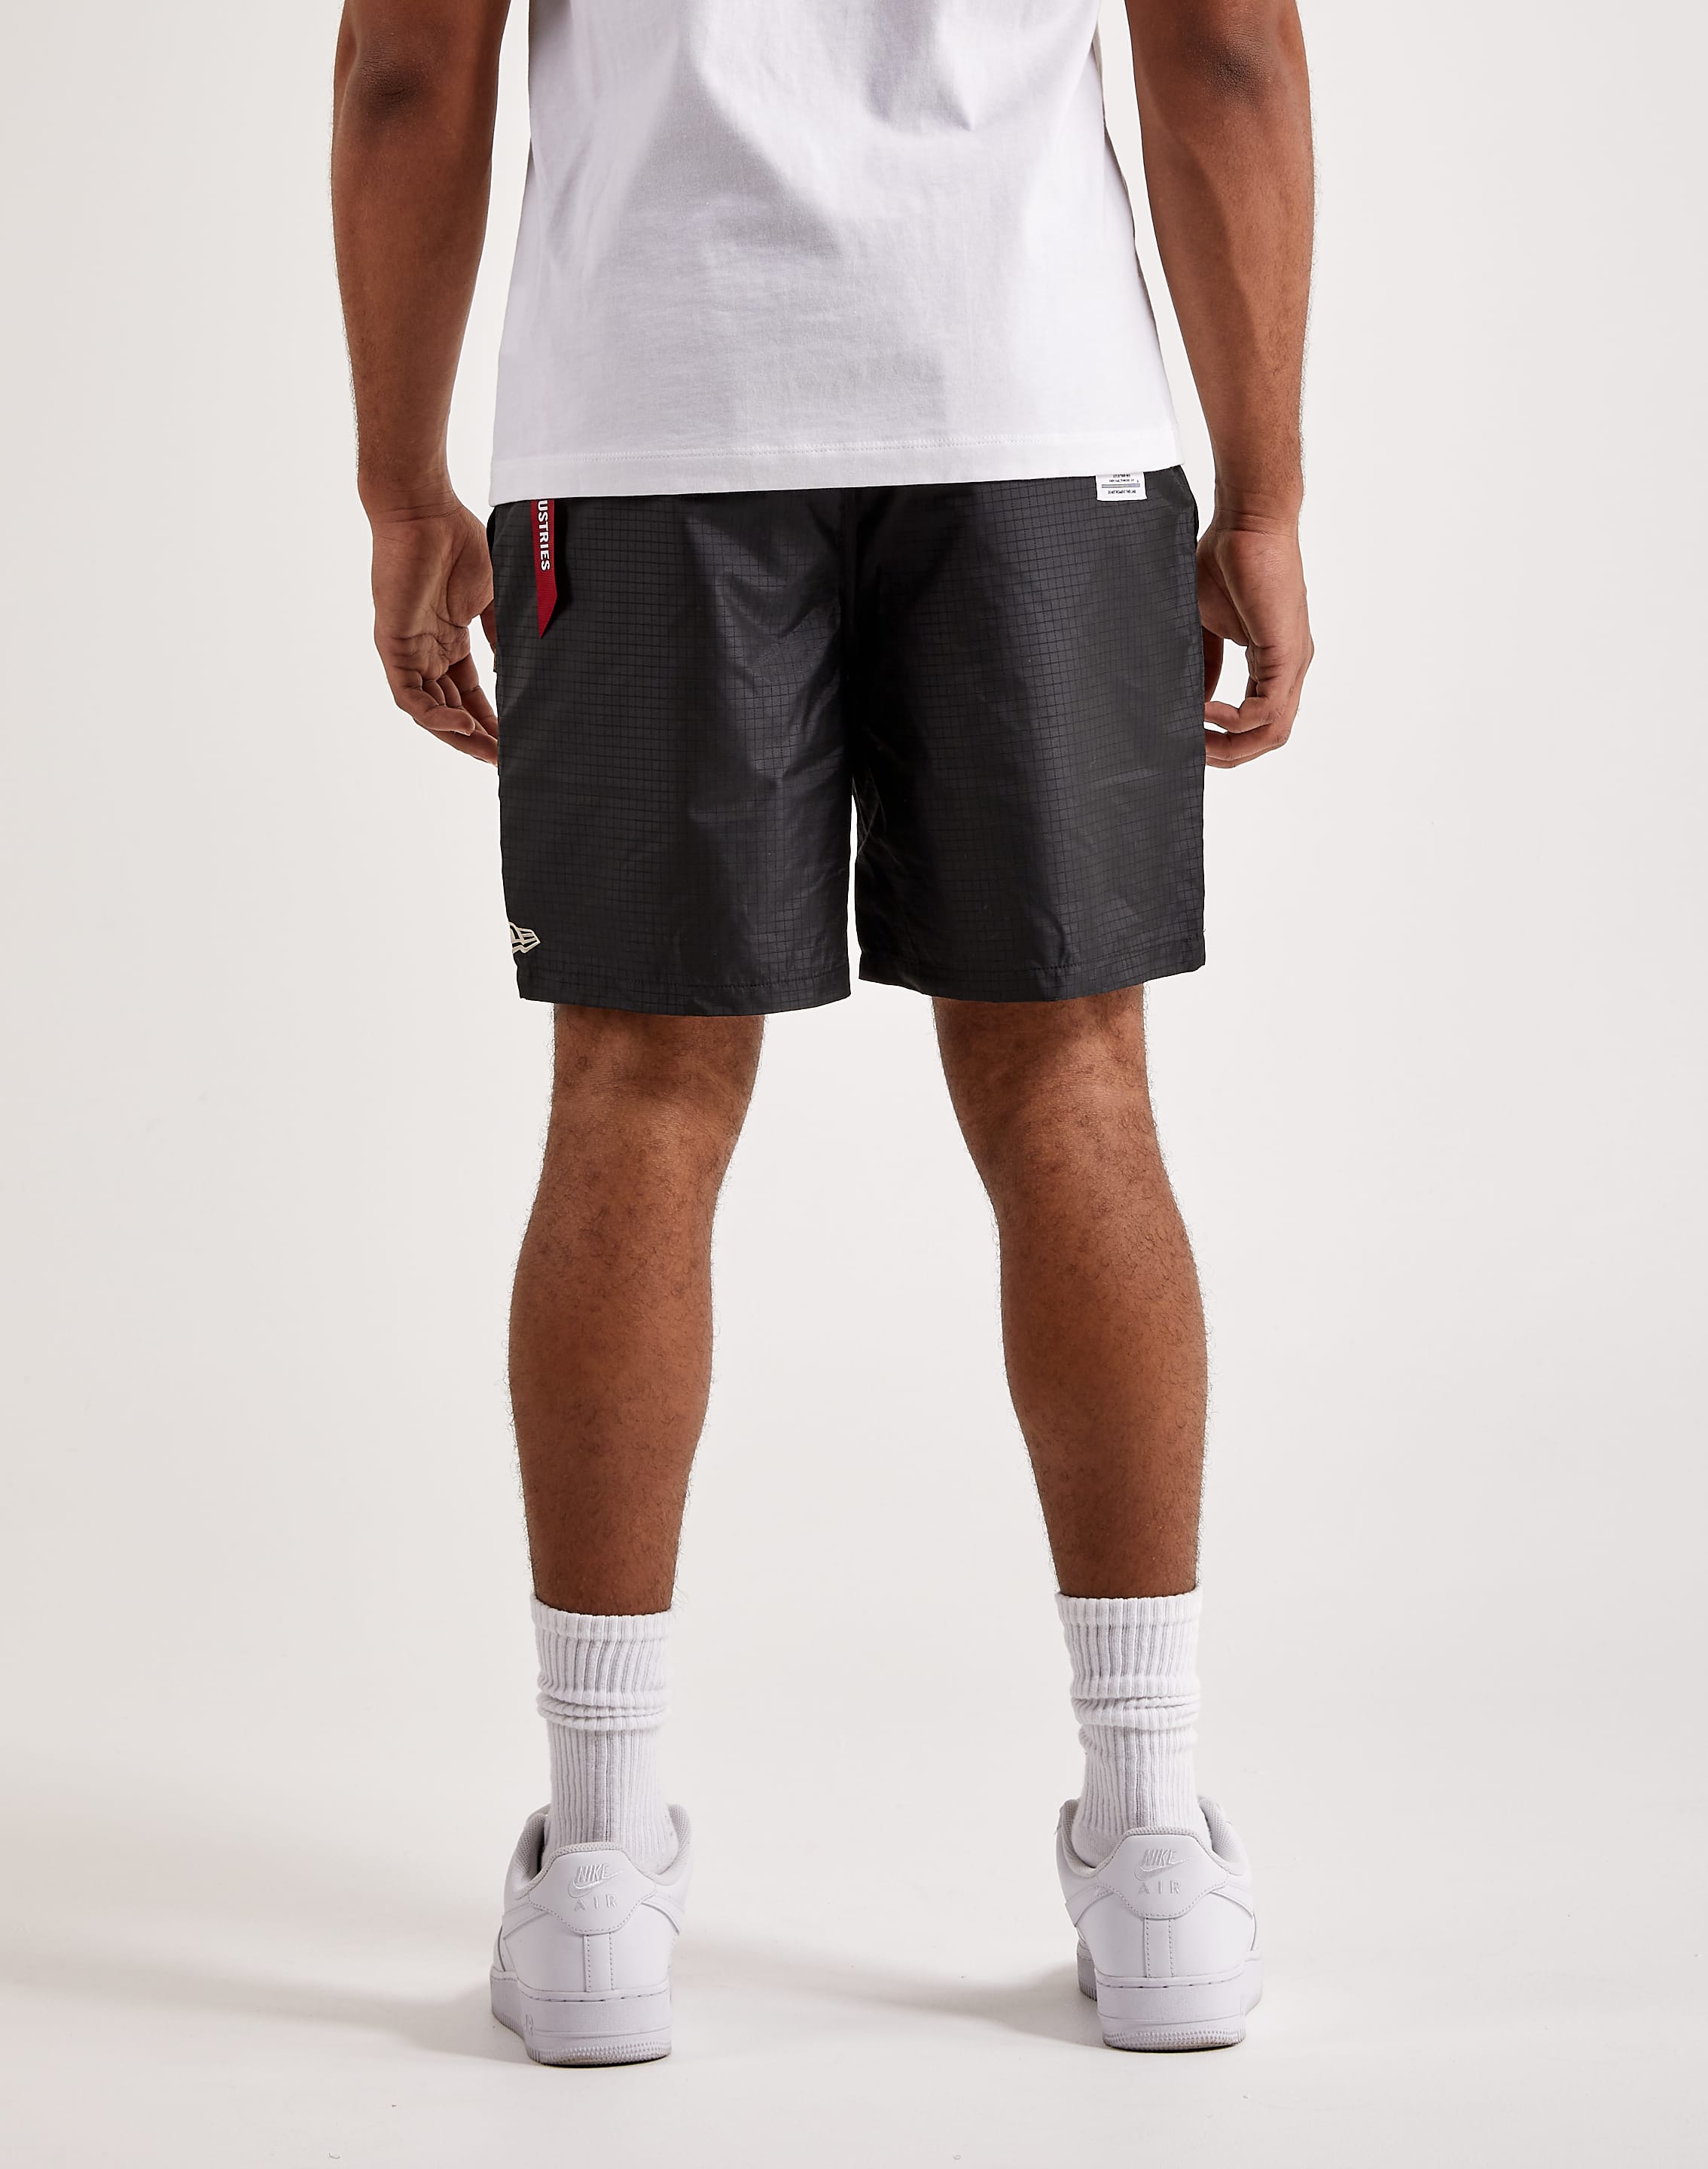 Chicago Industries Alpha Sox DTLR Shorts White –